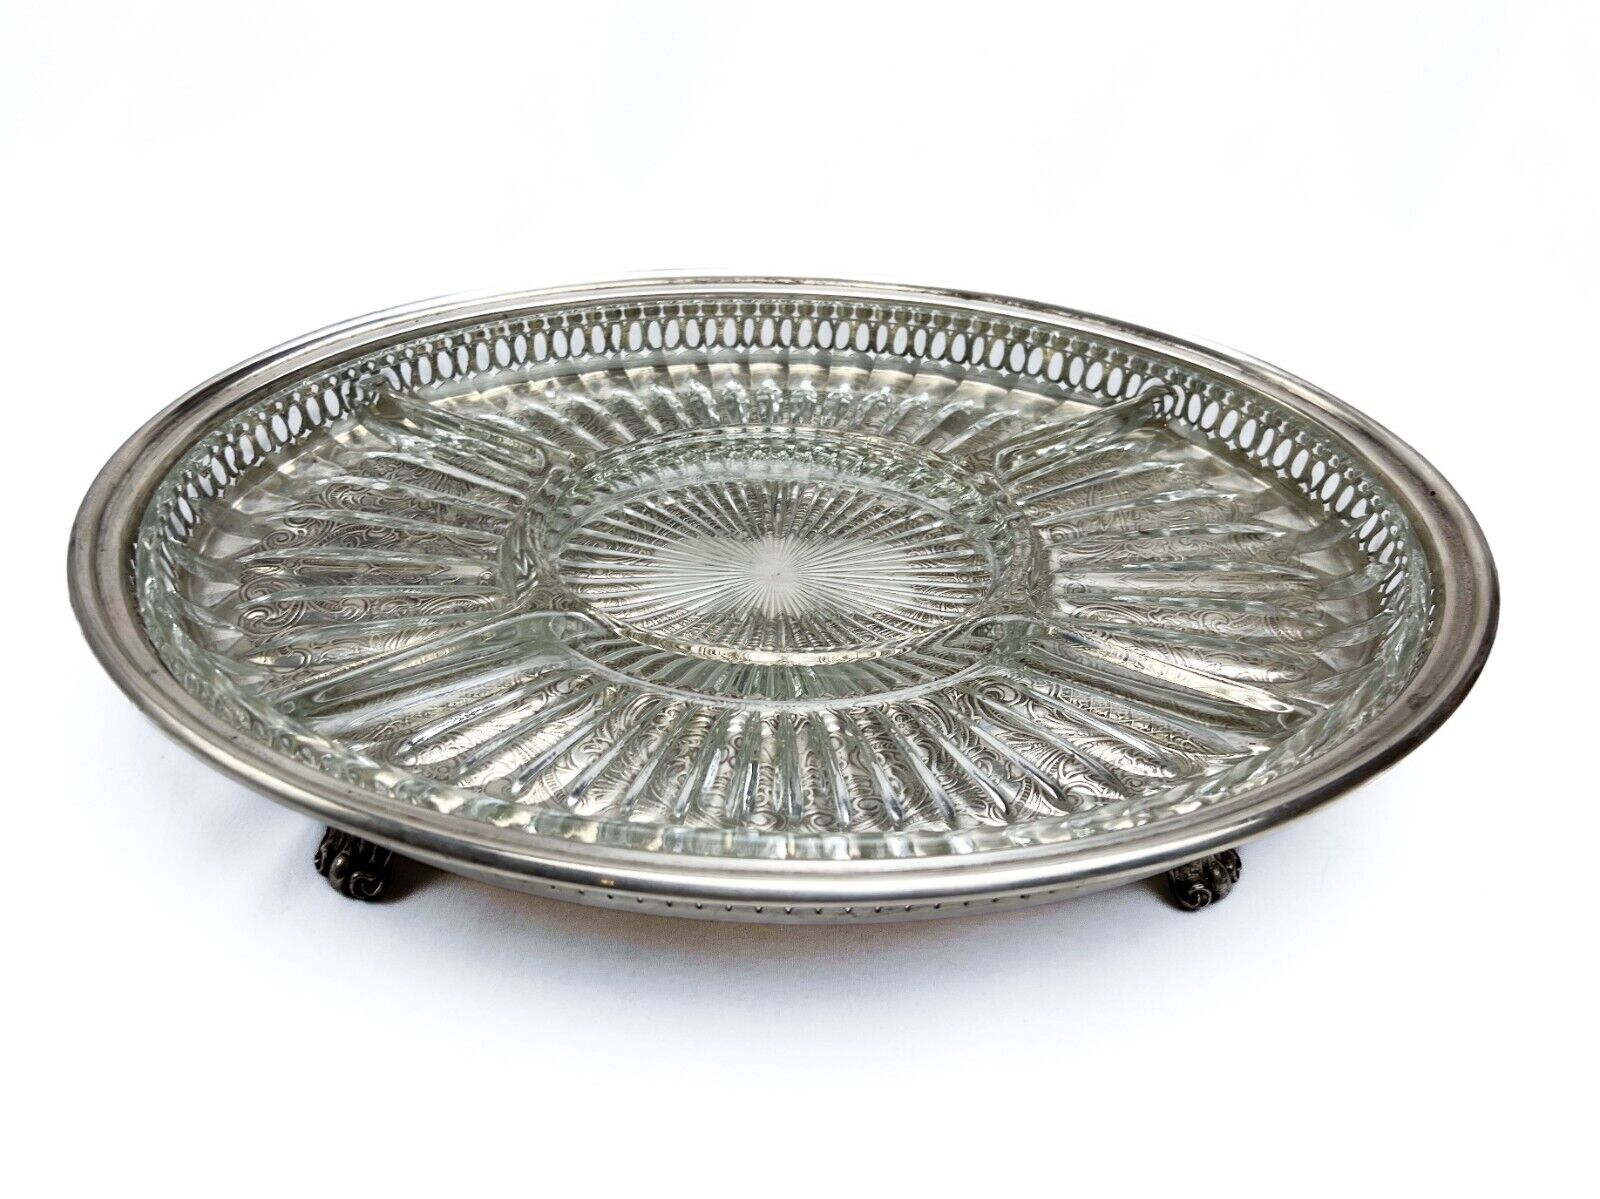 Leonard Silverplate Pierced Oval Serving Tray Divided Glass - 